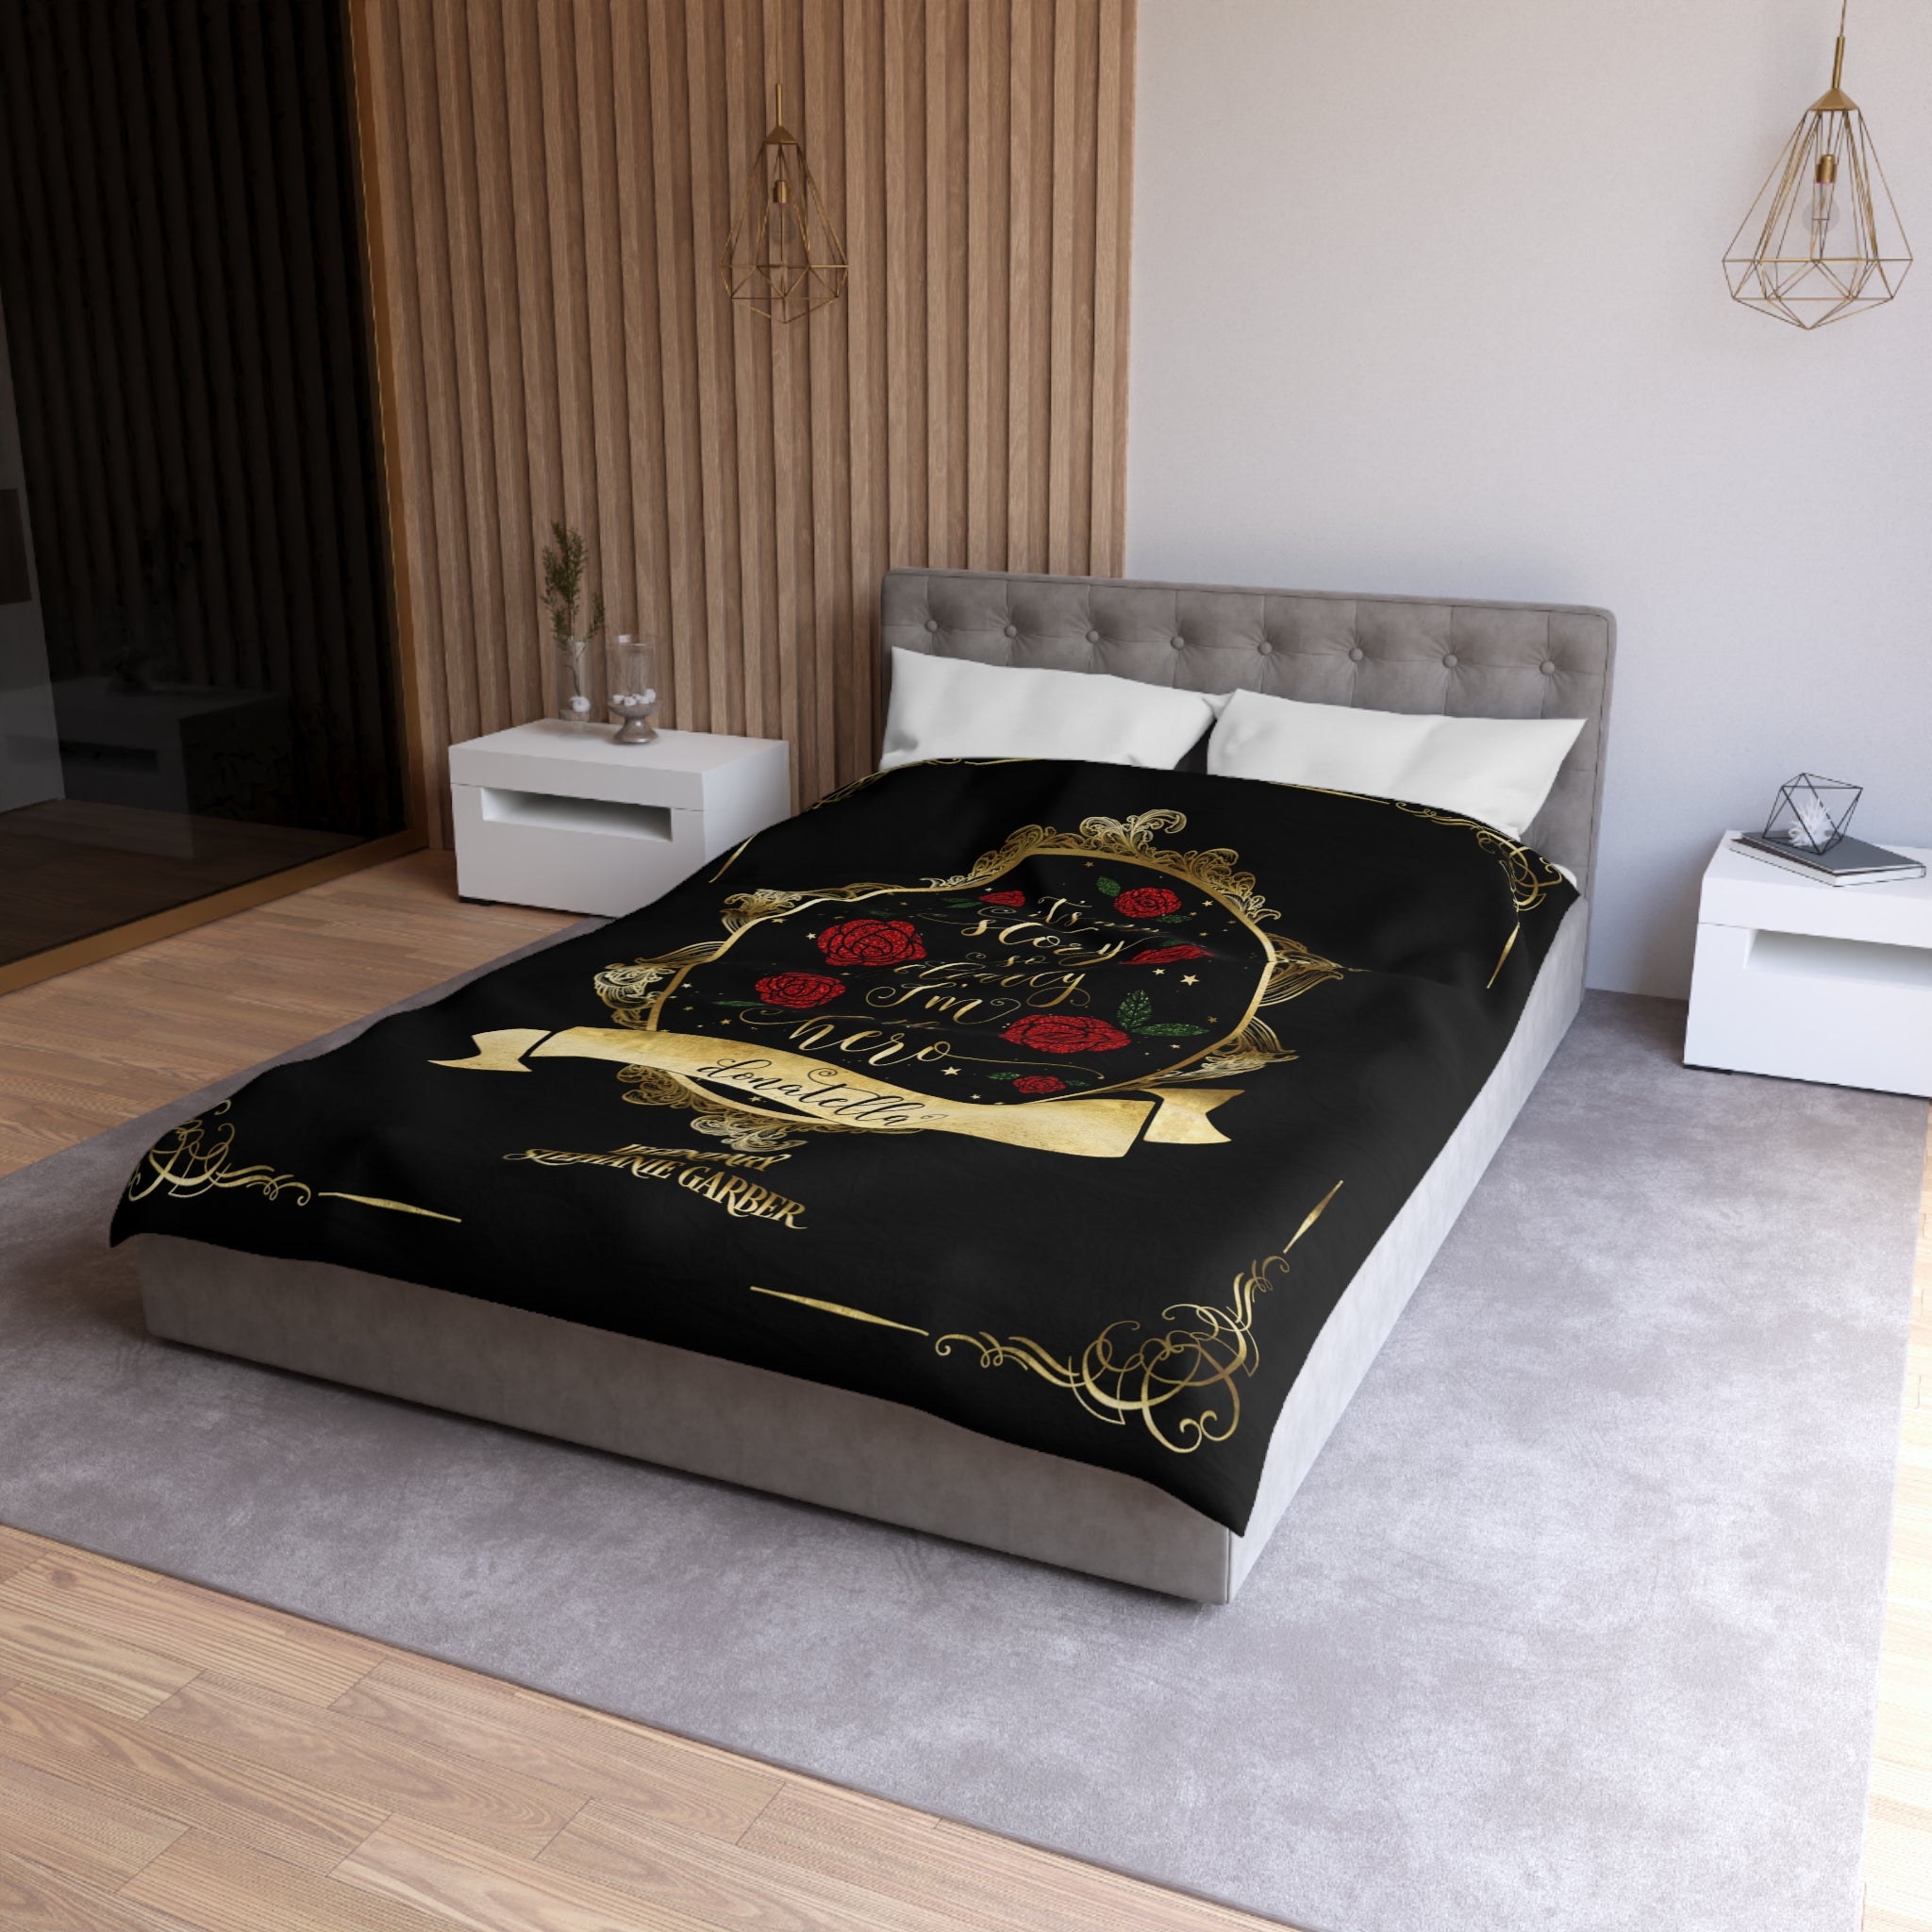 It's my story... Caraval Duvet Cover